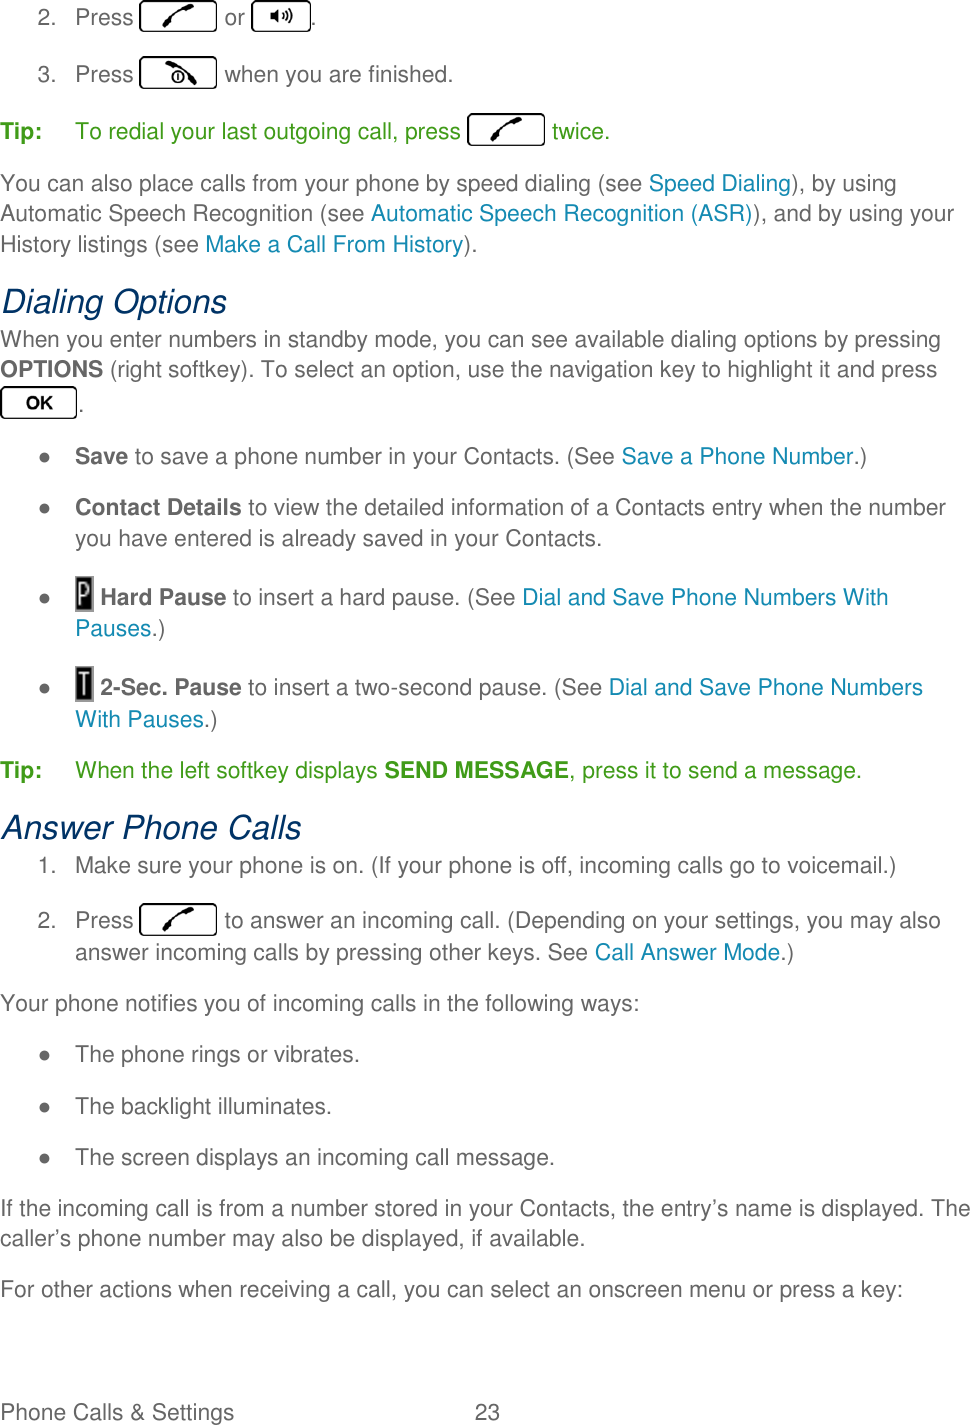 Phone Calls &amp; Settings  23   2.  Press   or  . 3.  Press   when you are finished. Tip:  To redial your last outgoing call, press   twice. You can also place calls from your phone by speed dialing (see Speed Dialing), by using Automatic Speech Recognition (see Automatic Speech Recognition (ASR)), and by using your History listings (see Make a Call From History). Dialing Options When you enter numbers in standby mode, you can see available dialing options by pressing OPTIONS (right softkey). To select an option, use the navigation key to highlight it and press . ● Save to save a phone number in your Contacts. (See Save a Phone Number.) ● Contact Details to view the detailed information of a Contacts entry when the number you have entered is already saved in your Contacts. ●  Hard Pause to insert a hard pause. (See Dial and Save Phone Numbers With Pauses.) ●  2-Sec. Pause to insert a two-second pause. (See Dial and Save Phone Numbers With Pauses.) Tip:  When the left softkey displays SEND MESSAGE, press it to send a message. Answer Phone Calls 1.  Make sure your phone is on. (If your phone is off, incoming calls go to voicemail.) 2.  Press   to answer an incoming call. (Depending on your settings, you may also answer incoming calls by pressing other keys. See Call Answer Mode.) Your phone notifies you of incoming calls in the following ways: ●  The phone rings or vibrates. ●  The backlight illuminates. ●  The screen displays an incoming call message. If the incoming call is from a number stored in your Contacts, the entry’s name is displayed. The caller’s phone number may also be displayed, if available. For other actions when receiving a call, you can select an onscreen menu or press a key: 